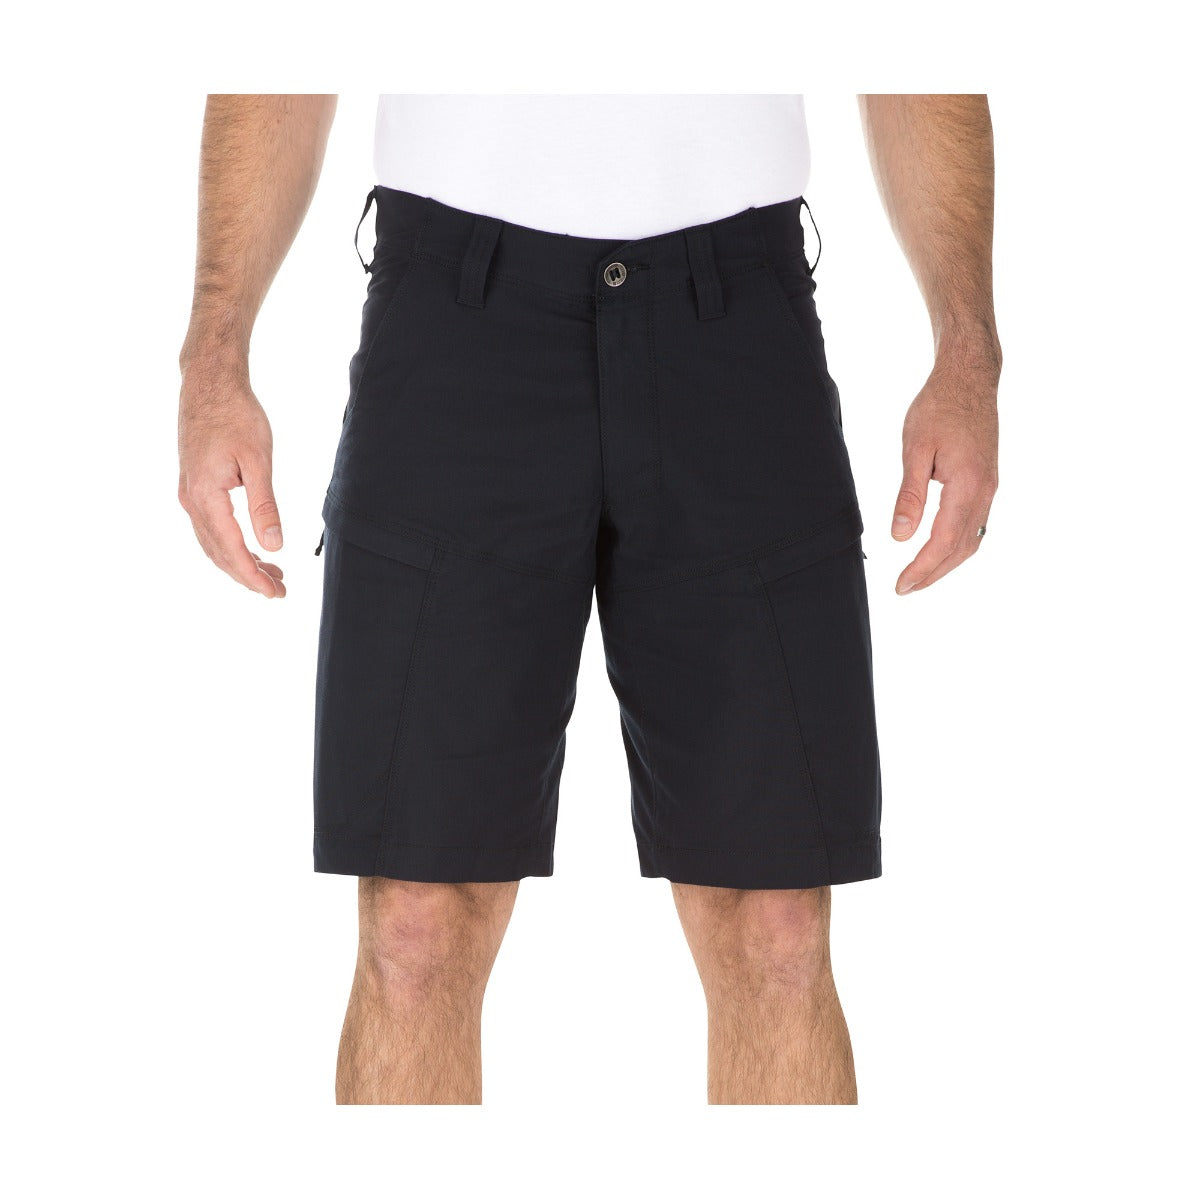 Buy FUEGO Fashion Wear Black Shorts for Women's at